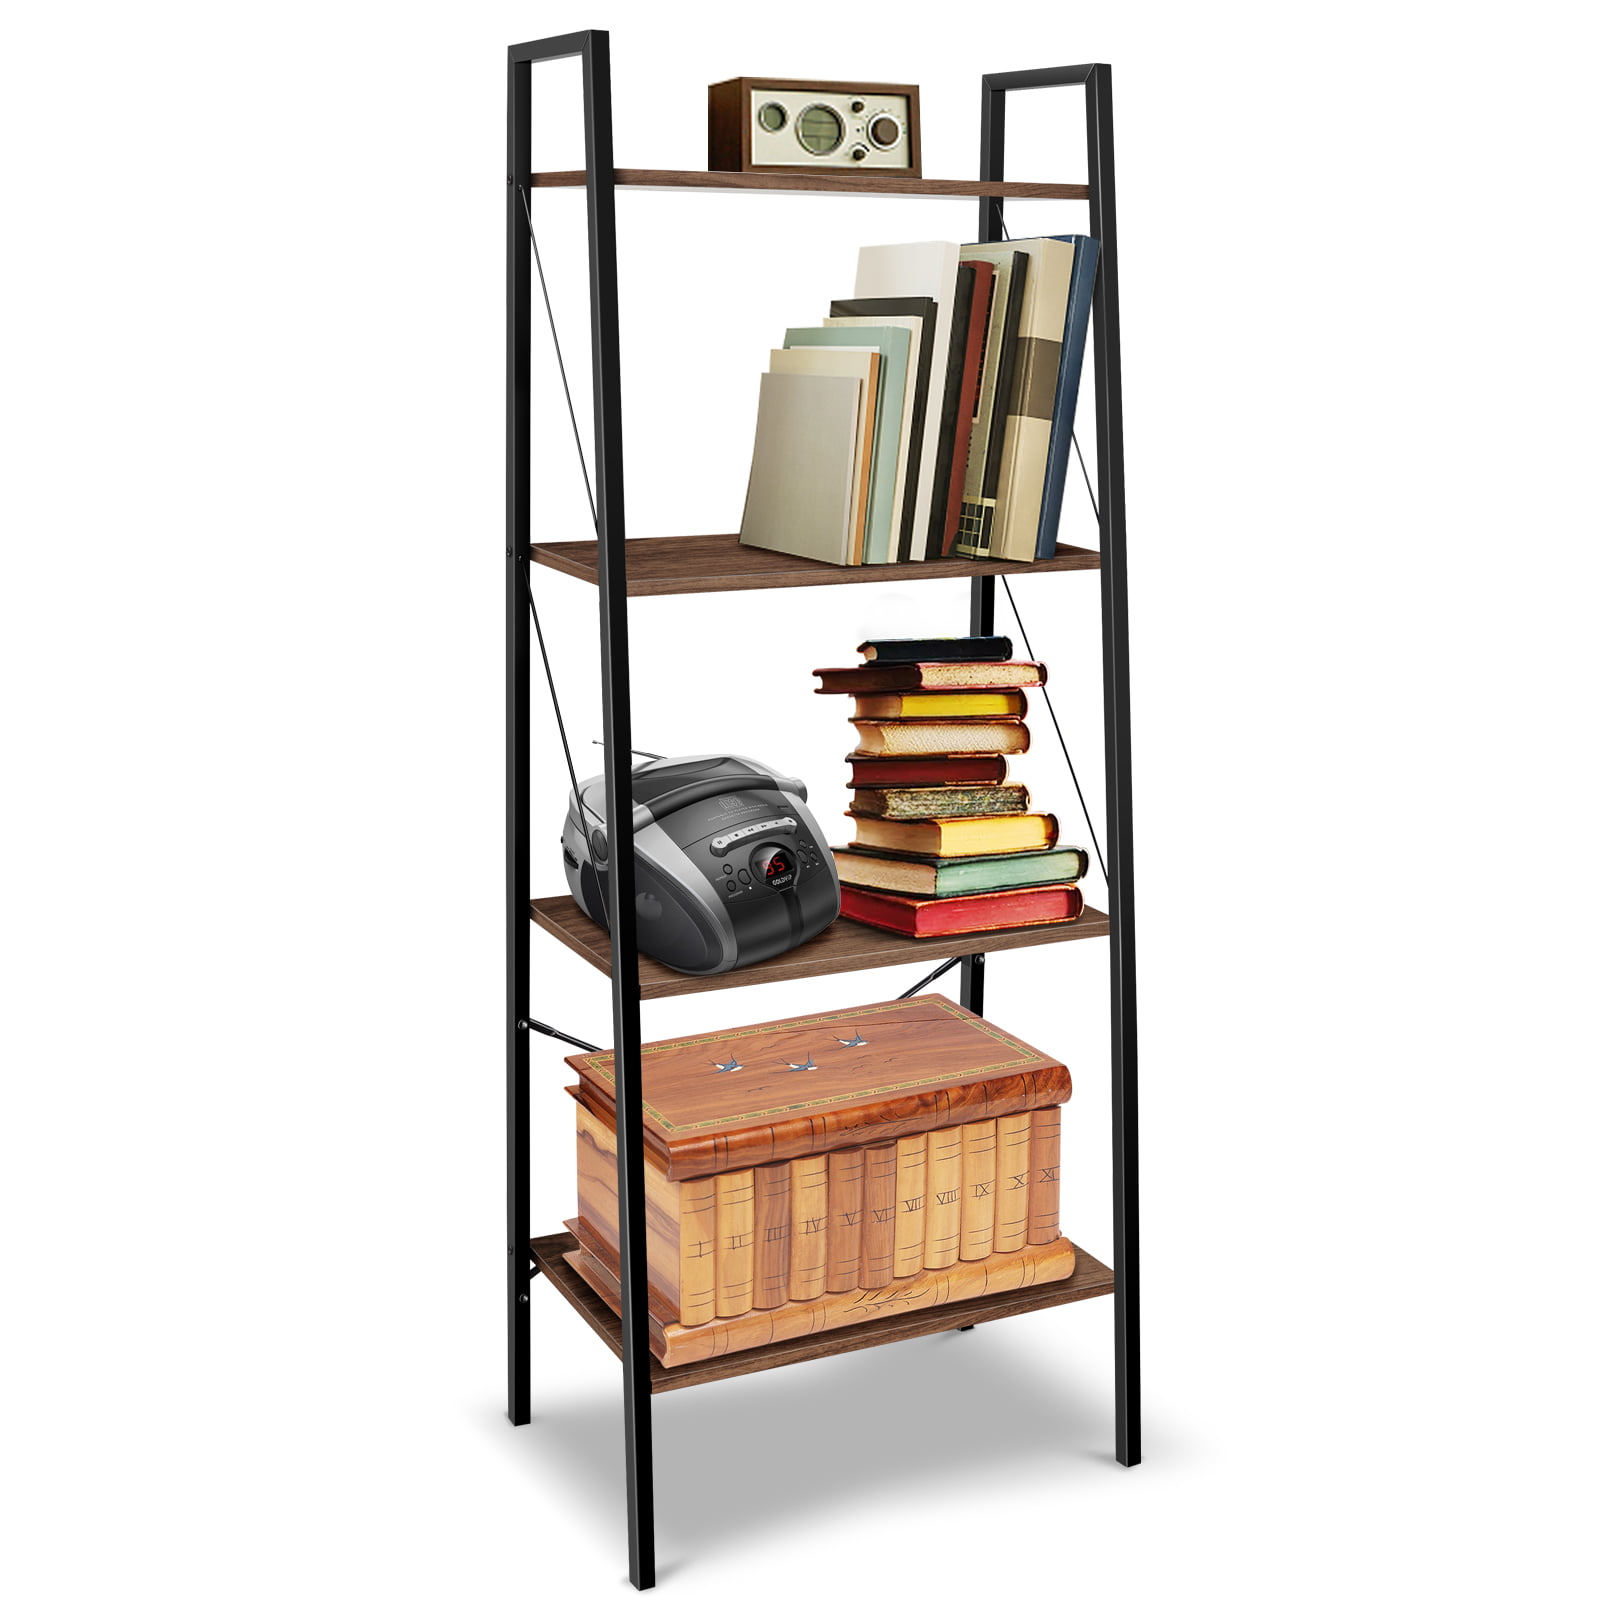 Cheflaud Ladder Shelves 4 Tier, Room And Board Bookcases Standing Shelves